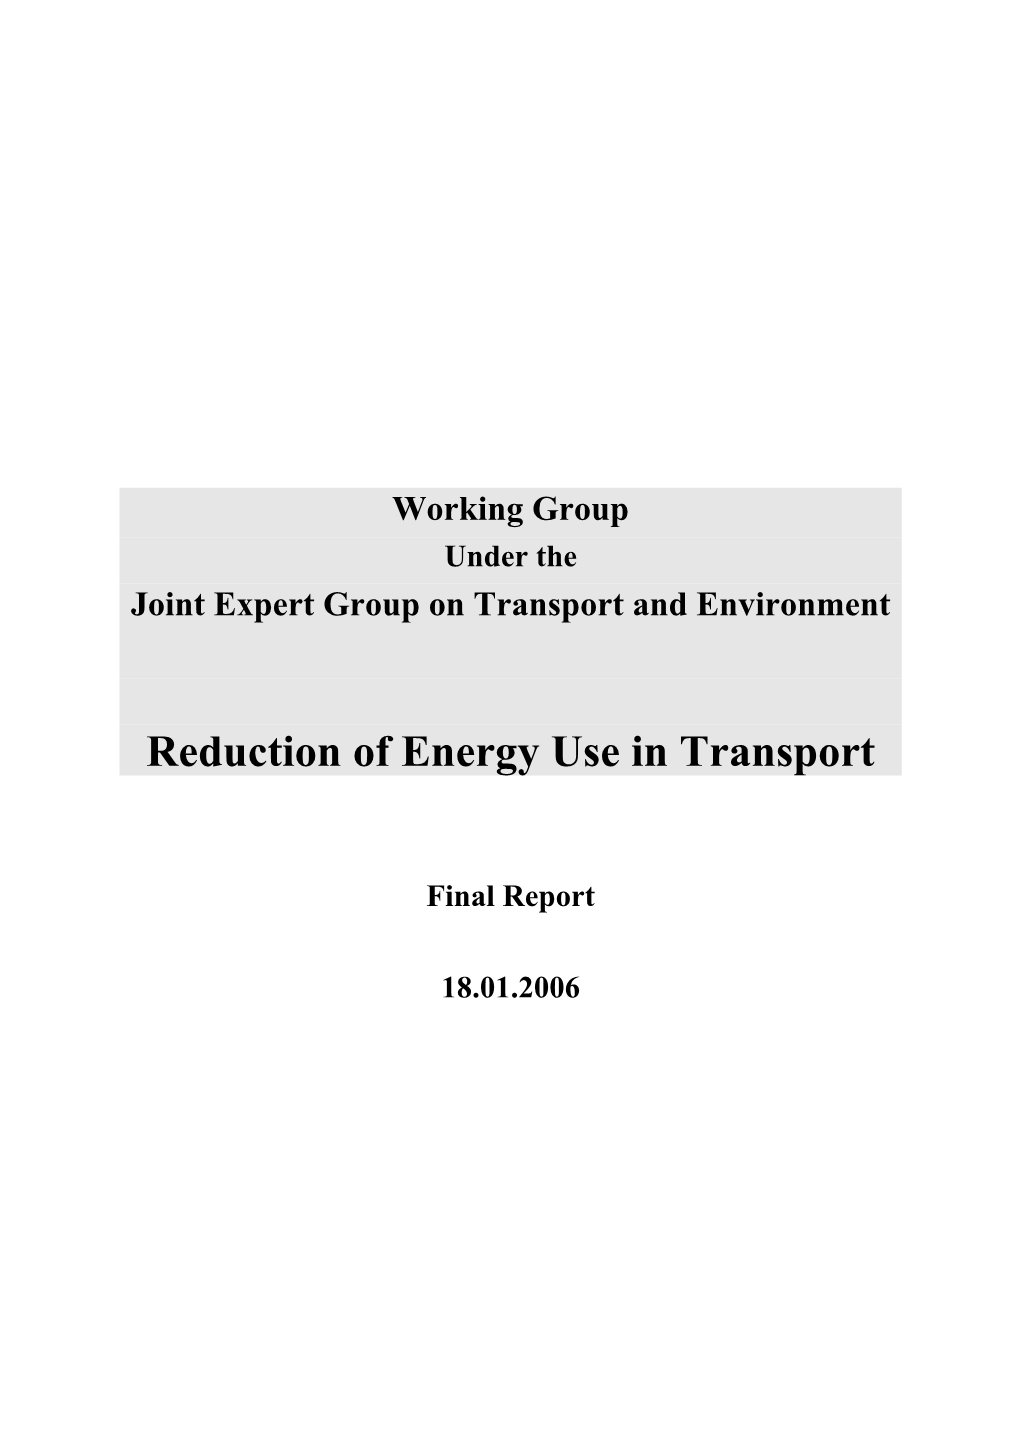 JEG Working Group on Reducing Energy Use in Transport